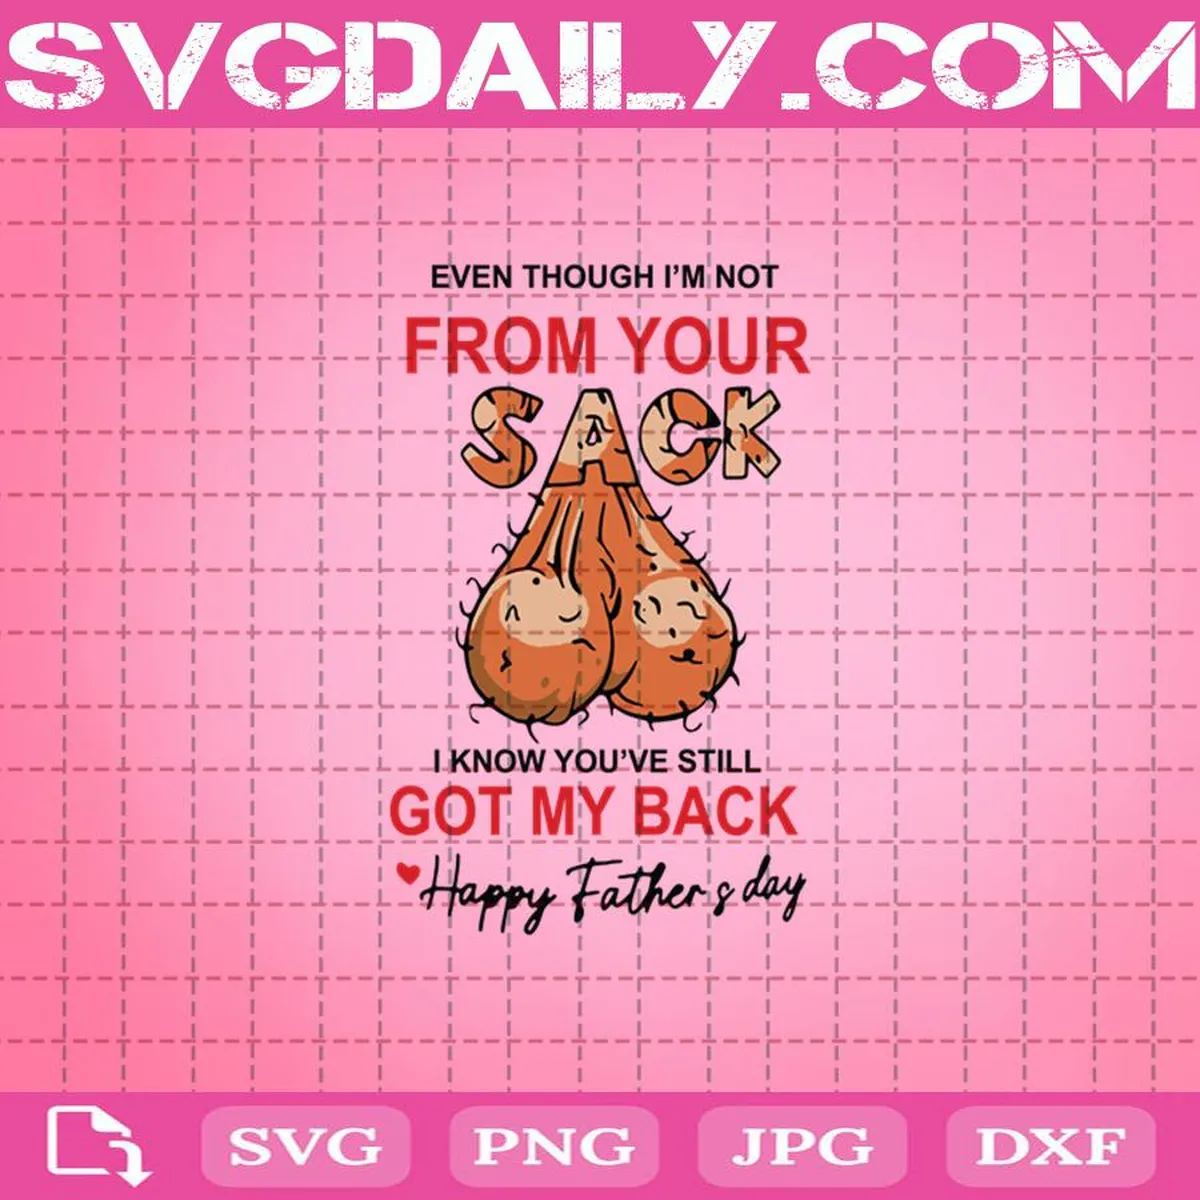 Even Though I Am Not From Your Sack I Know You Have Still Got My Back Happy Fathers Day Svg, Father's Day Svg, Father Svg